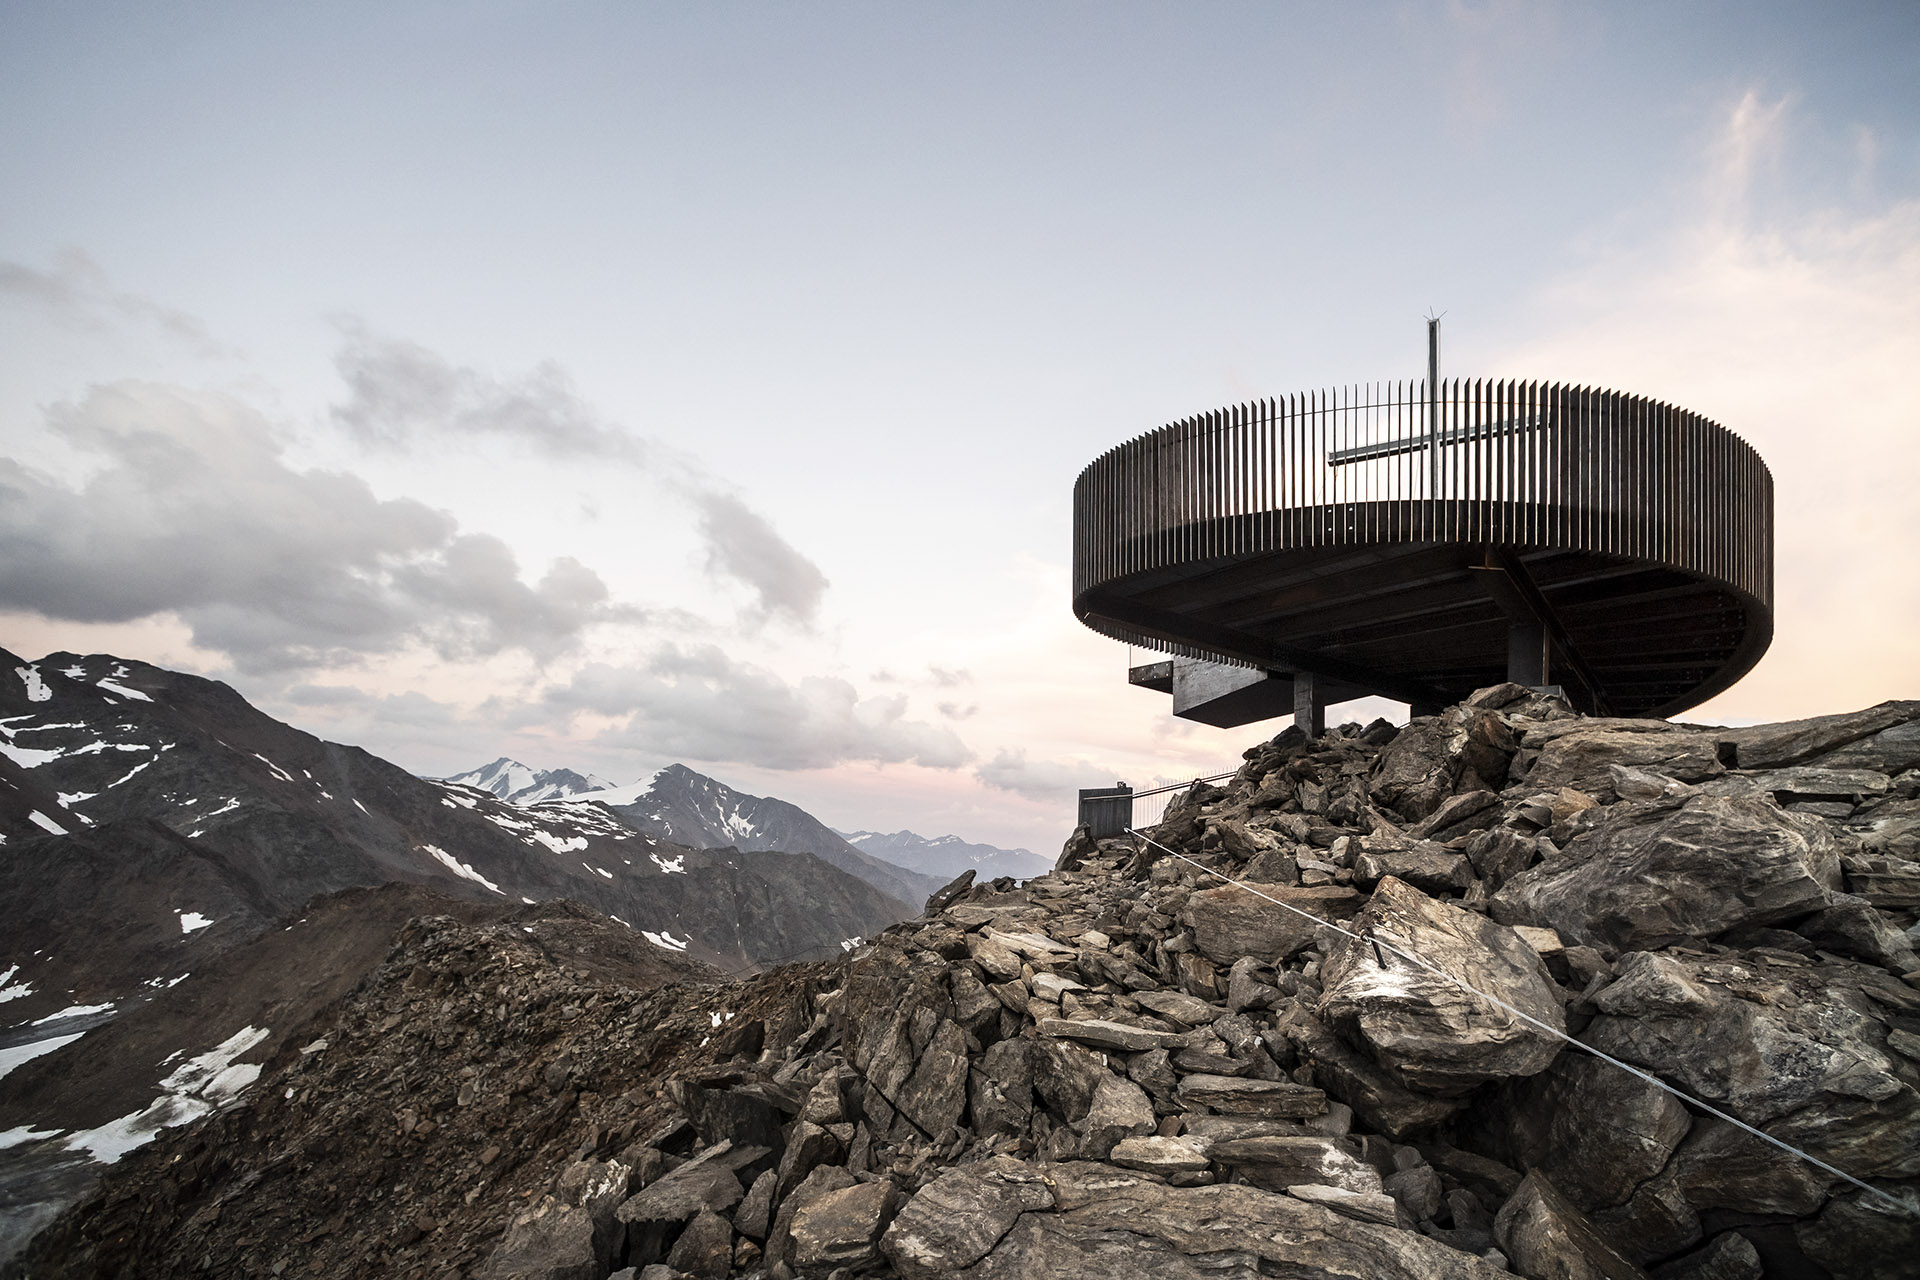 Corten steel and glass viewing platform. Breathtaking views of the mountain to breathe freedom